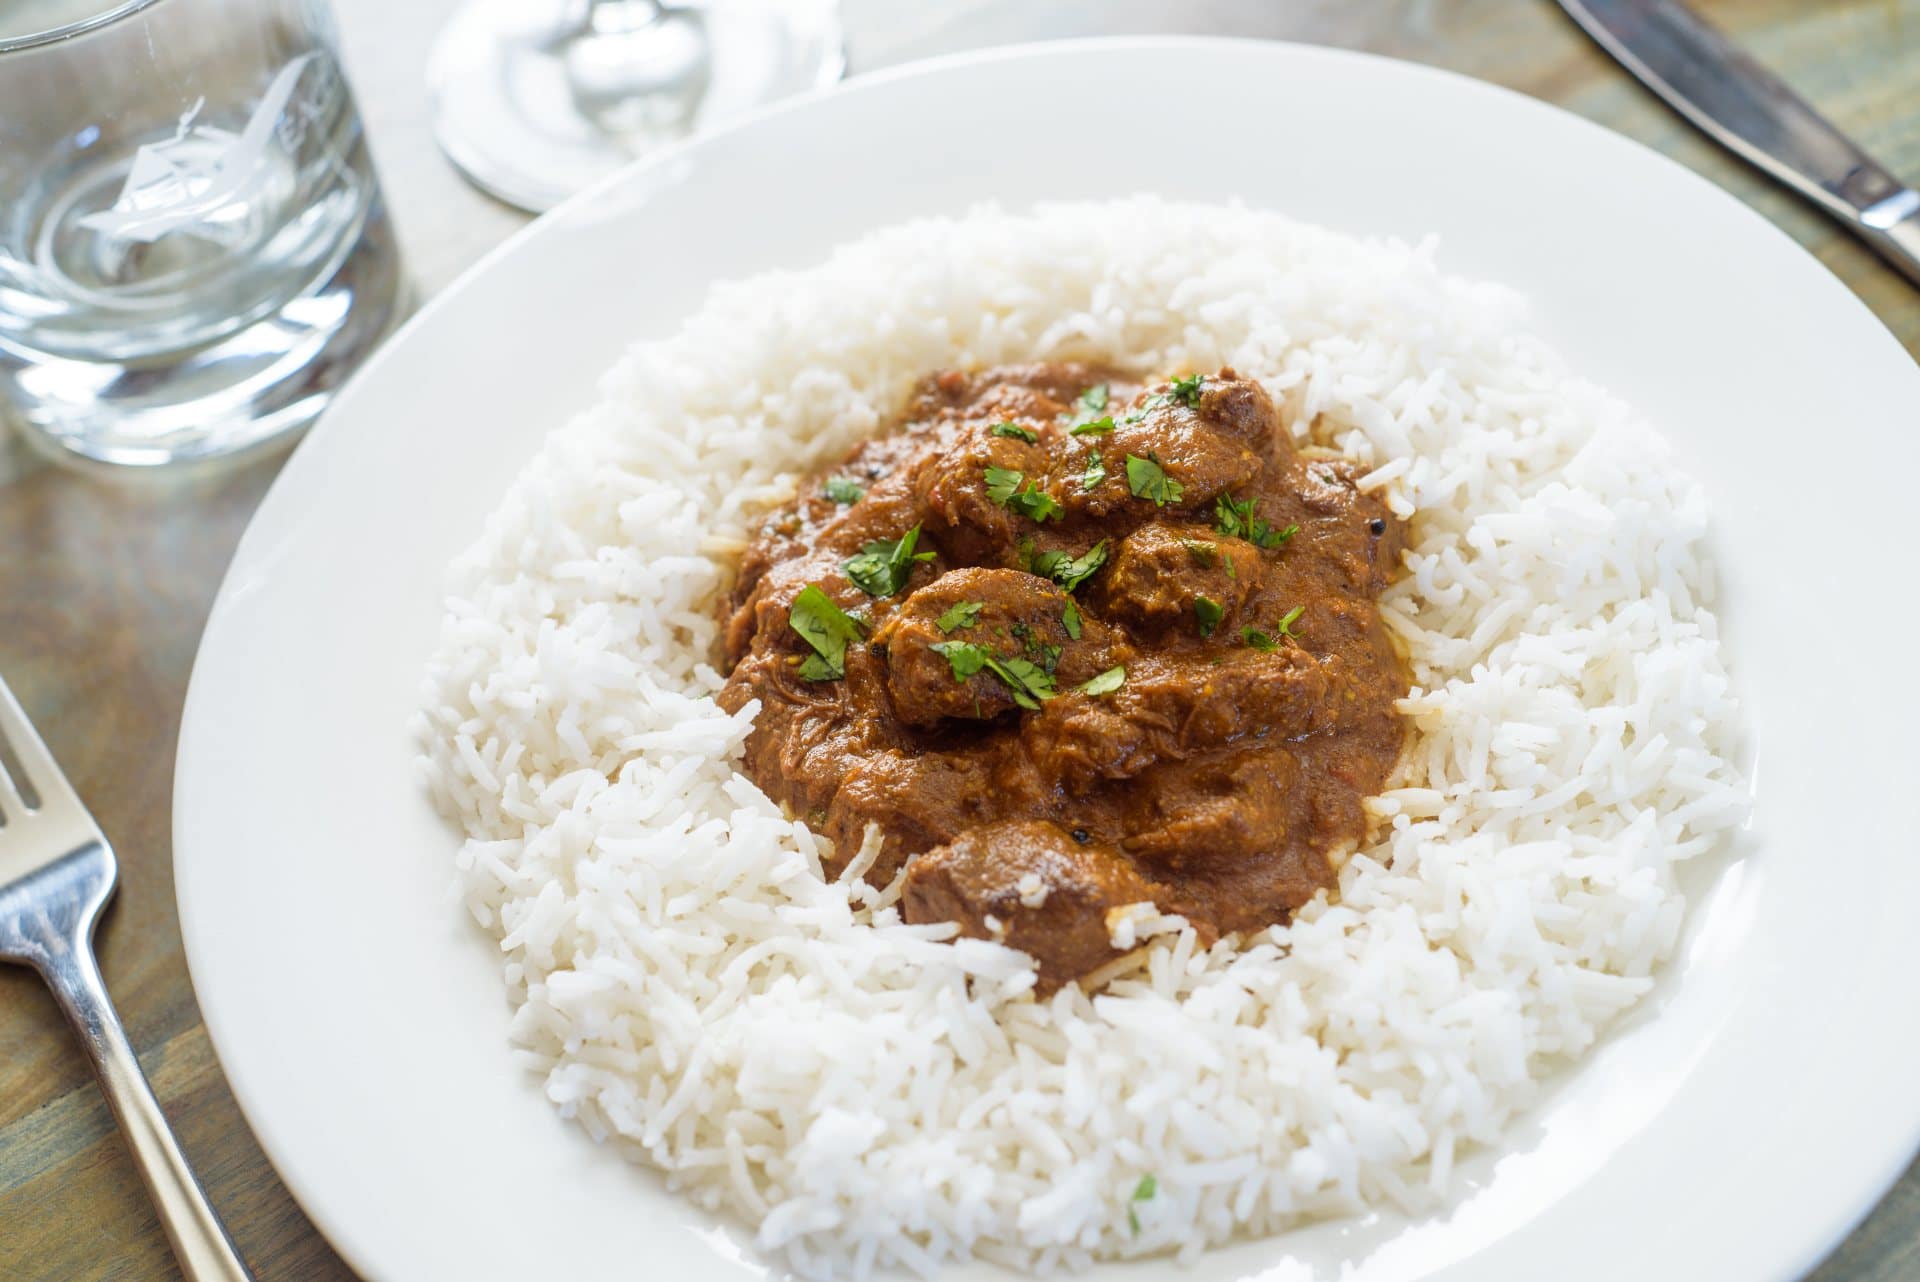 Eagle Brae's Venison Curry served on fluffy Rice